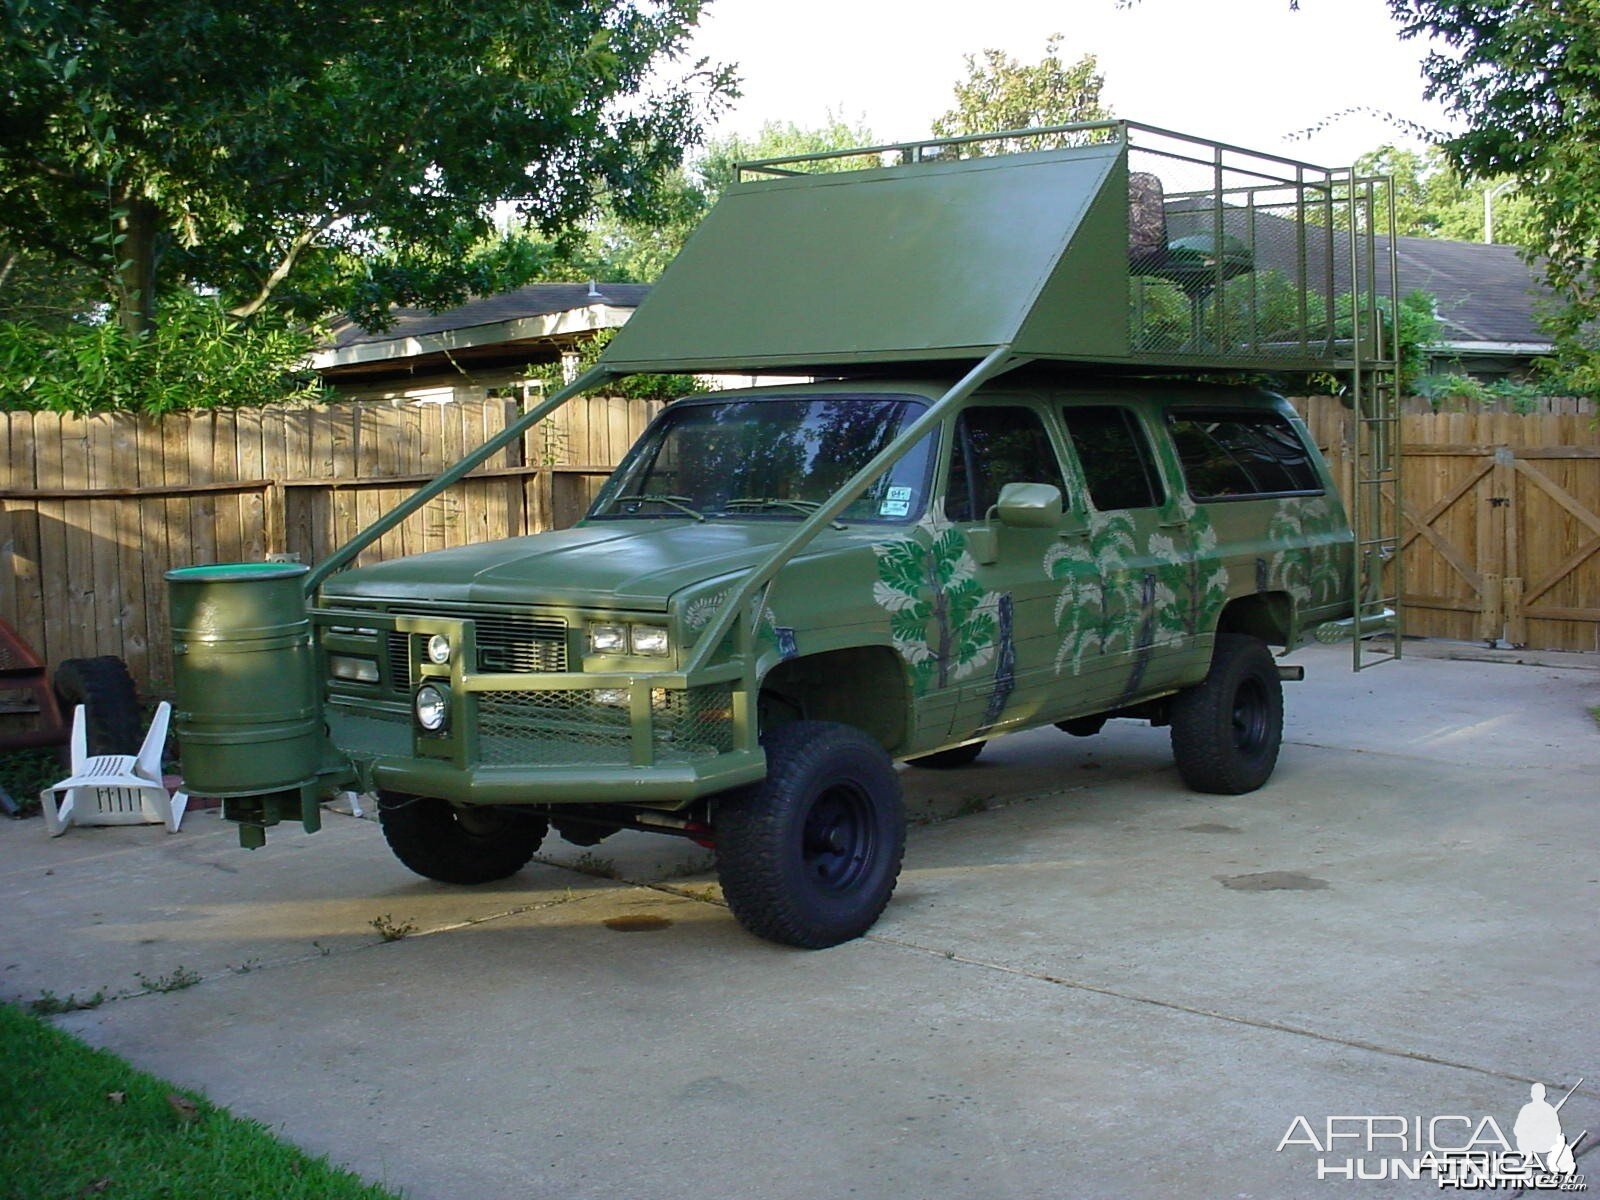 My hunting rig I built myself in 2004